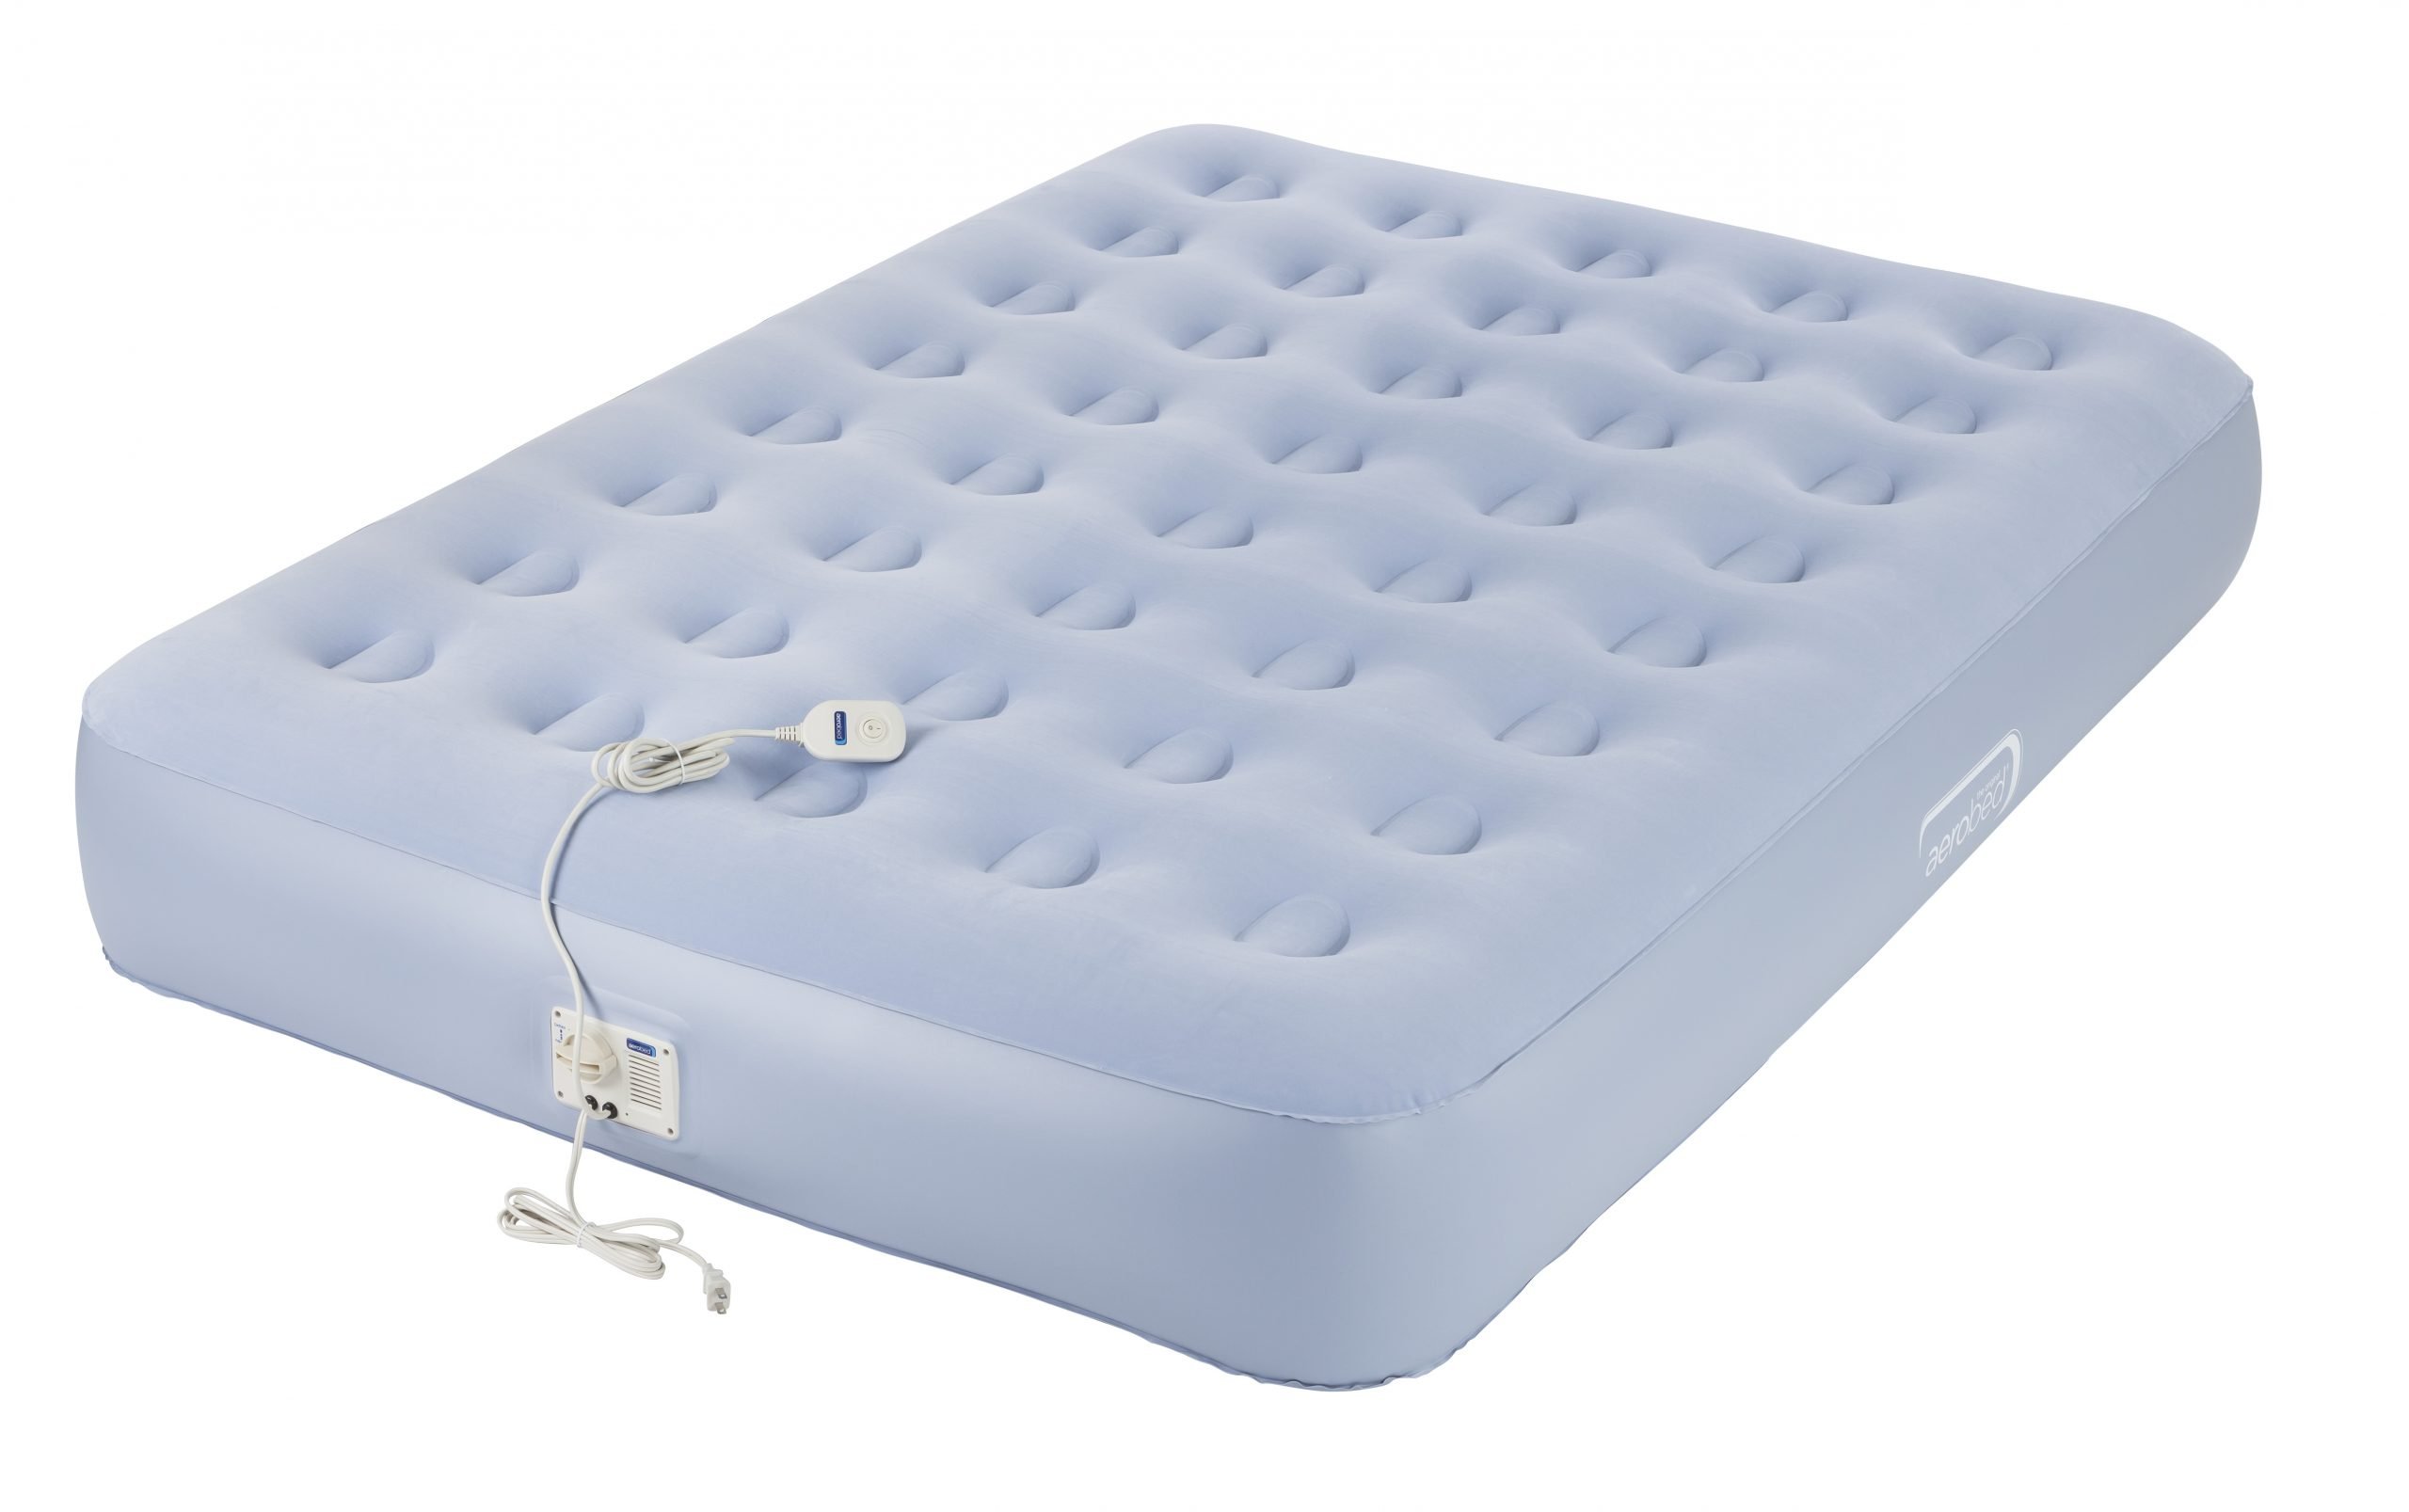 AeroBed Luxury 12 in Air Mattress, with Built